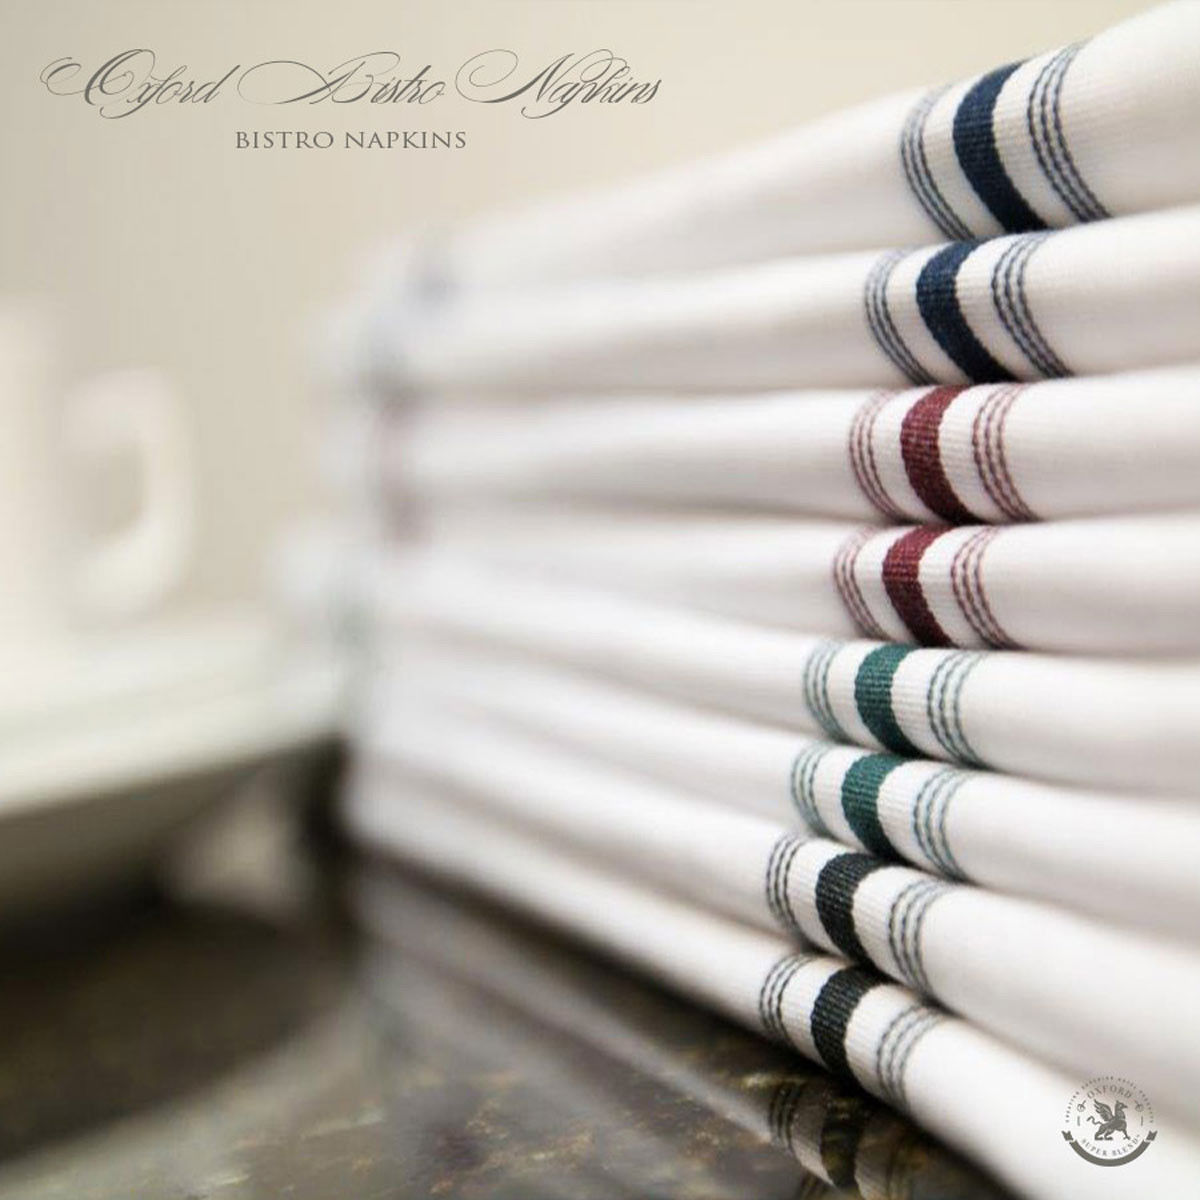 Do diplomat stripes napkins enhance the look of a dining room or restaurant?